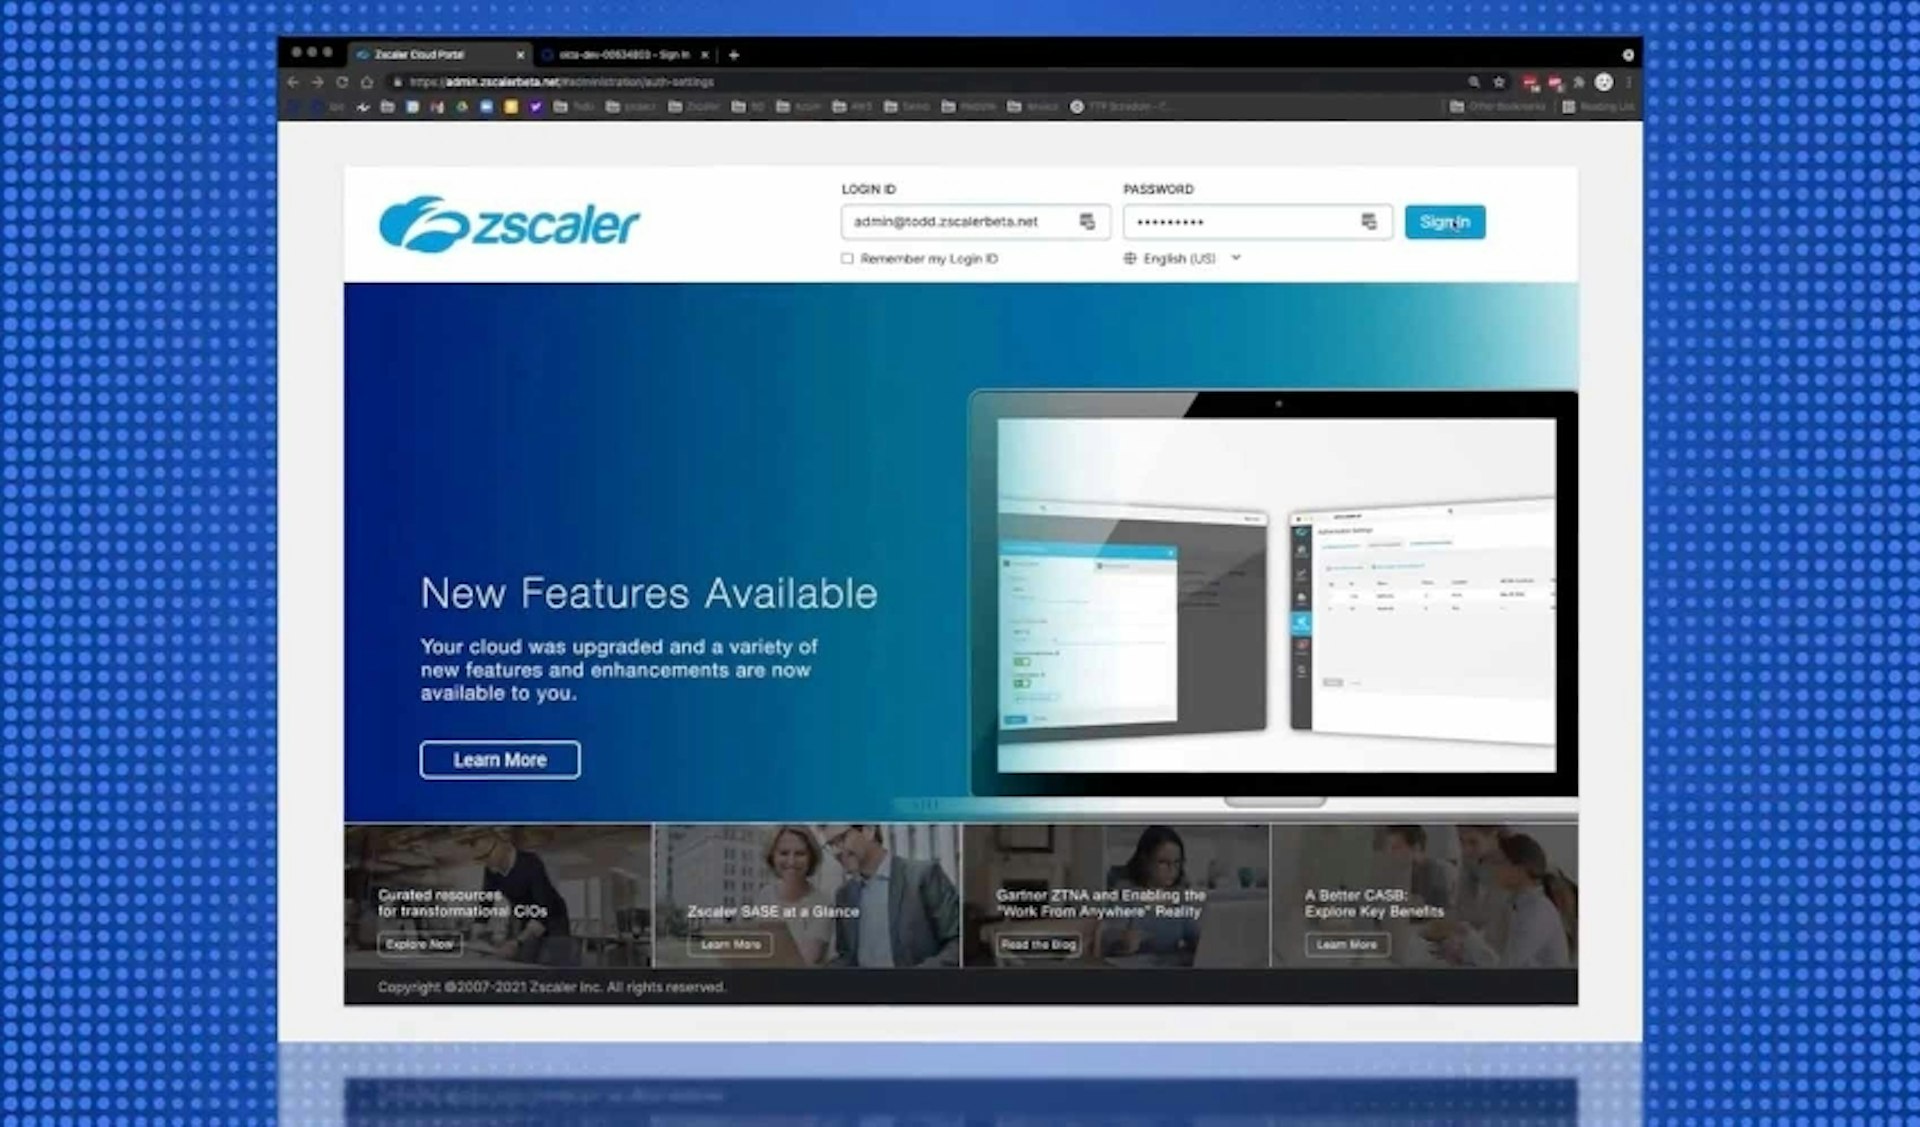 Zscaler Okta Demo (How to Configure Okta SAML Authentication and SCIM Provisioning with Zscaler) 